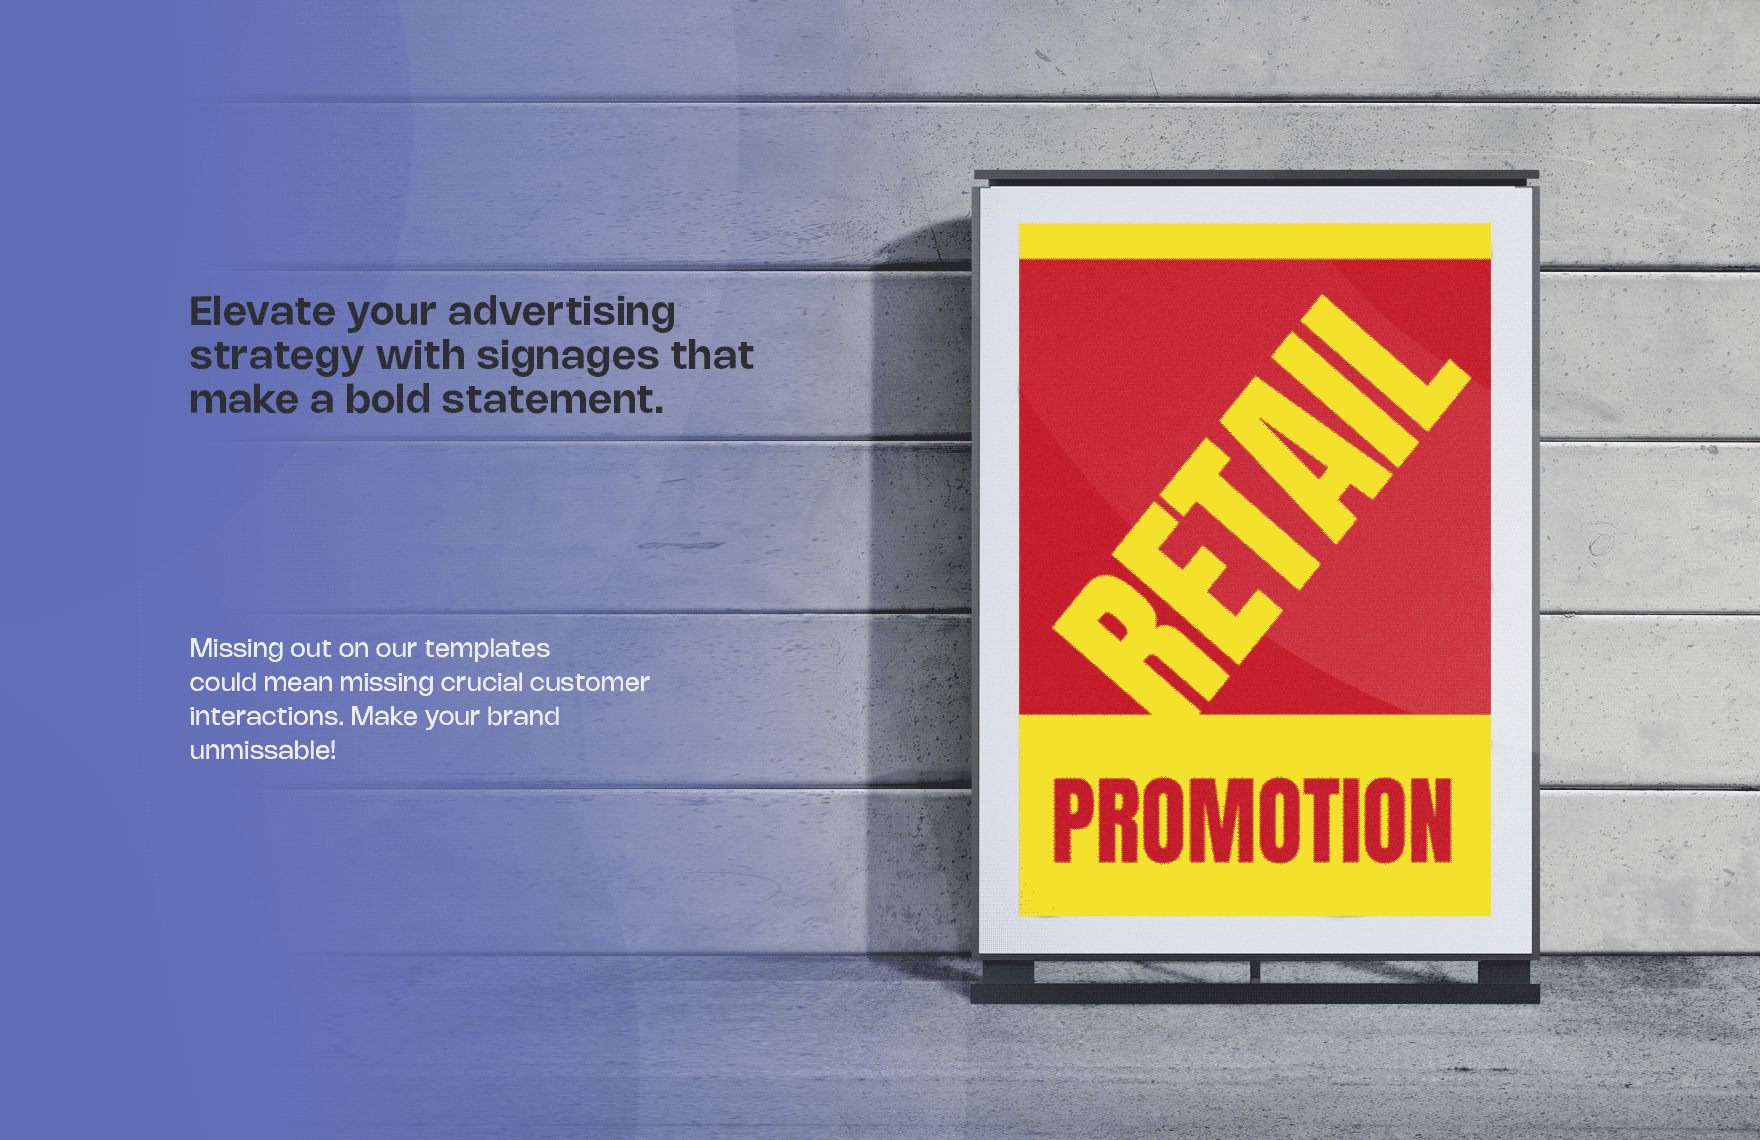 Retail Promotion Signage Template